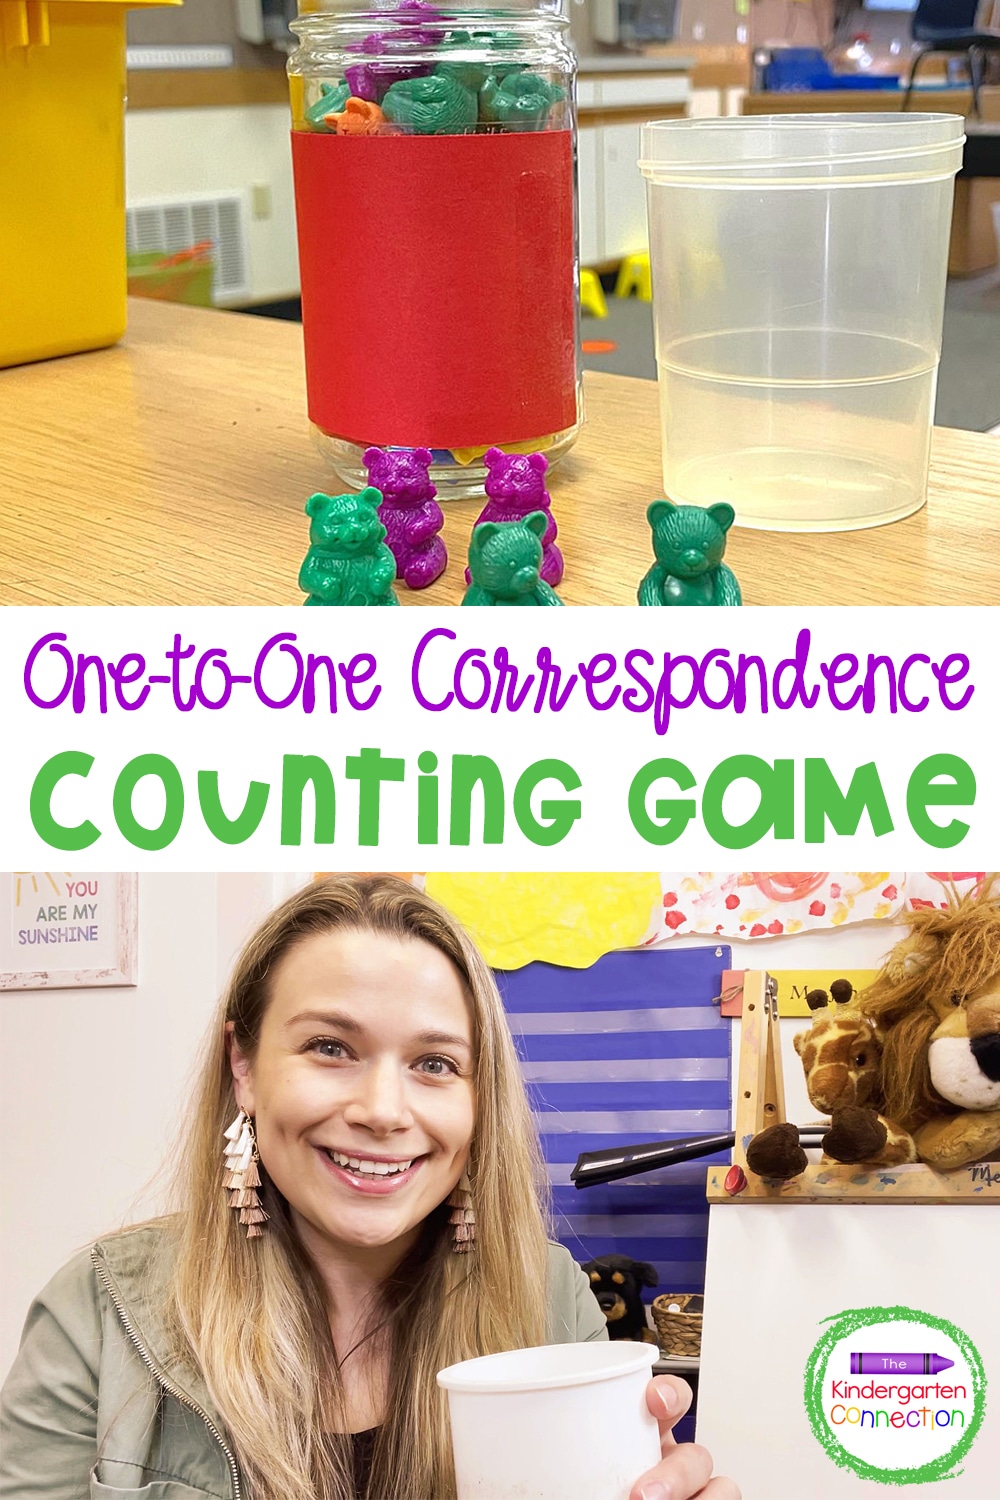 One-to-One Correspondence Counting Game